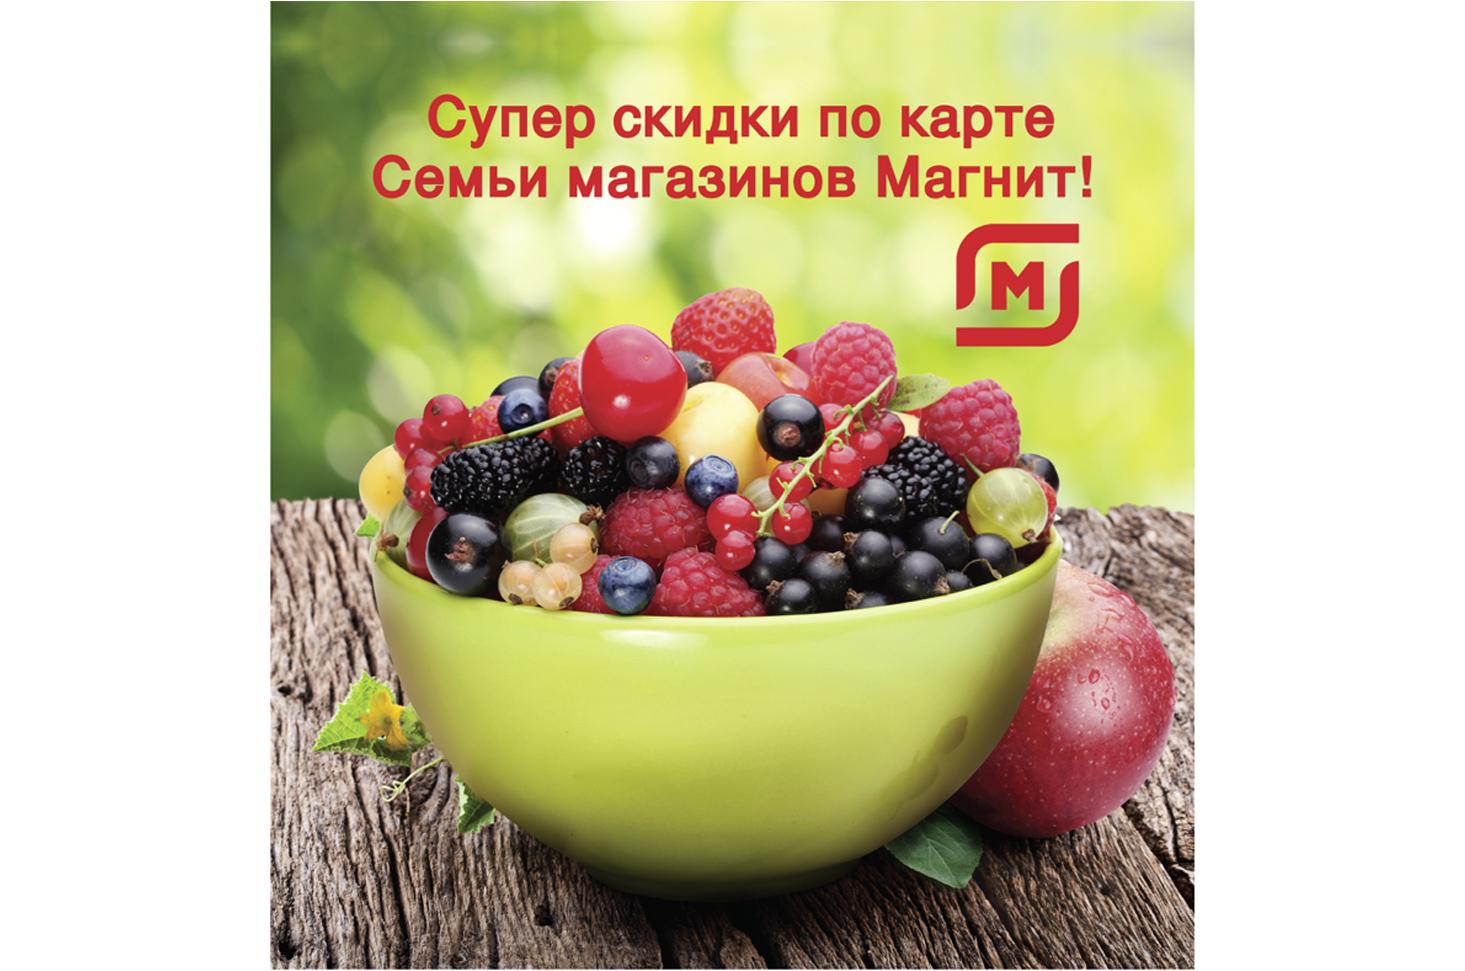 Magnit in Moscow Russia in-store fresh produce photography and brand communications